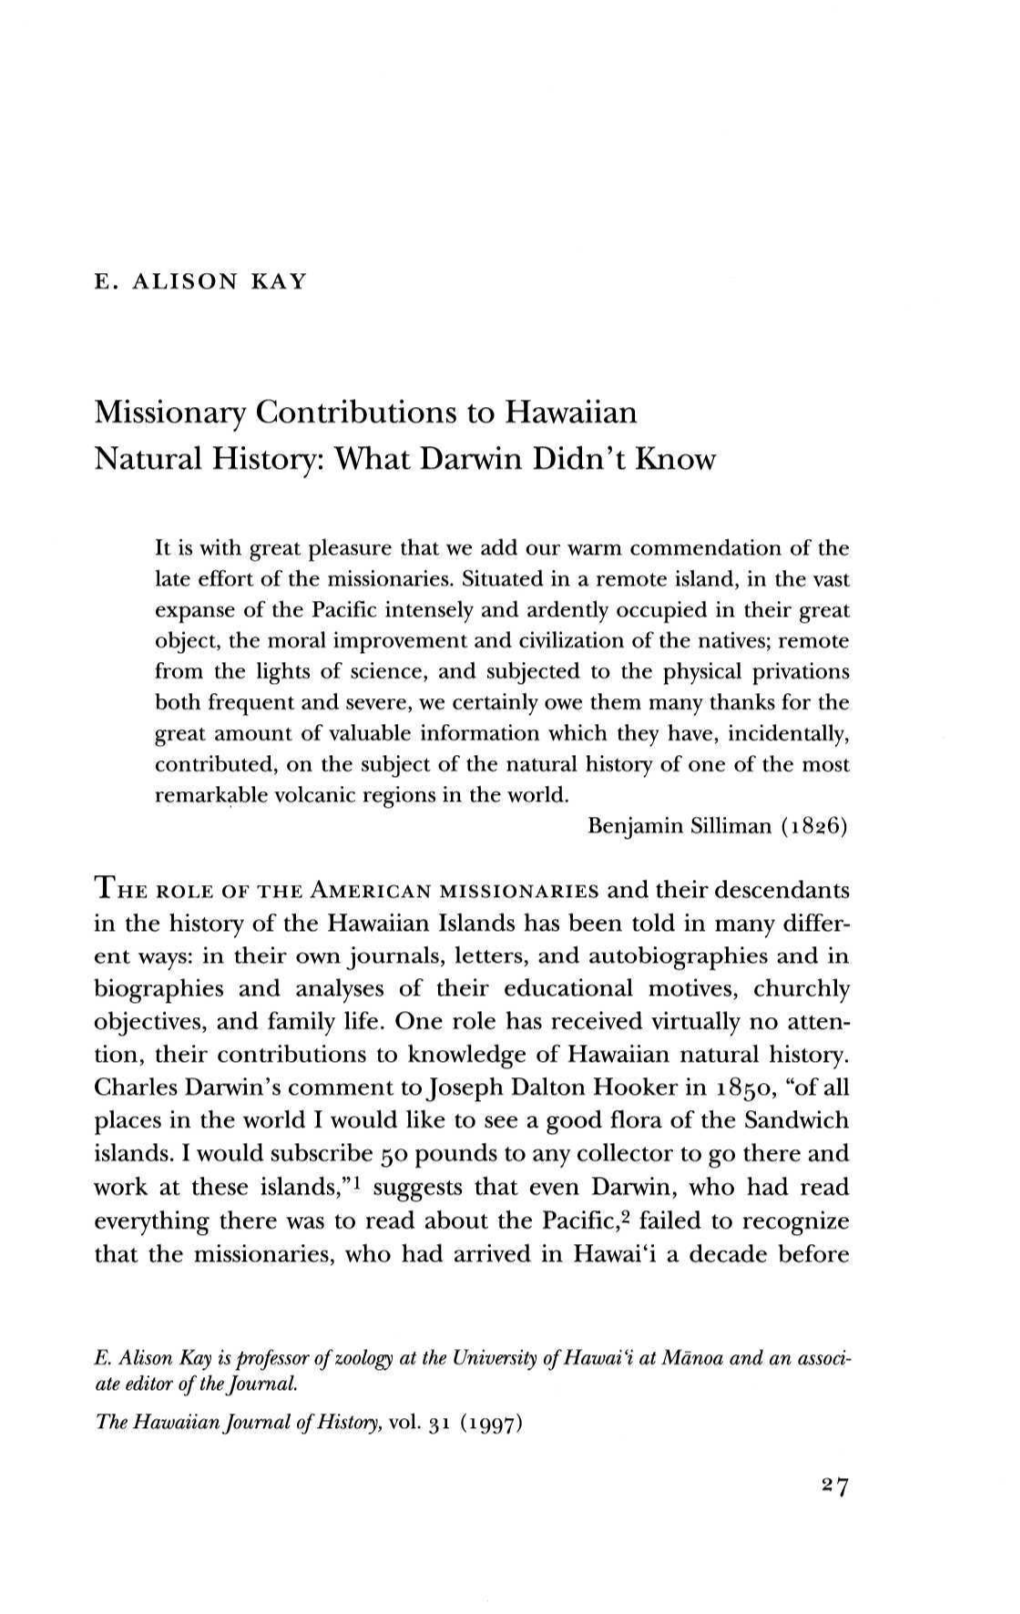 Missionary Contributions to Hawaiian Natural History: What Darwin Didn't Know